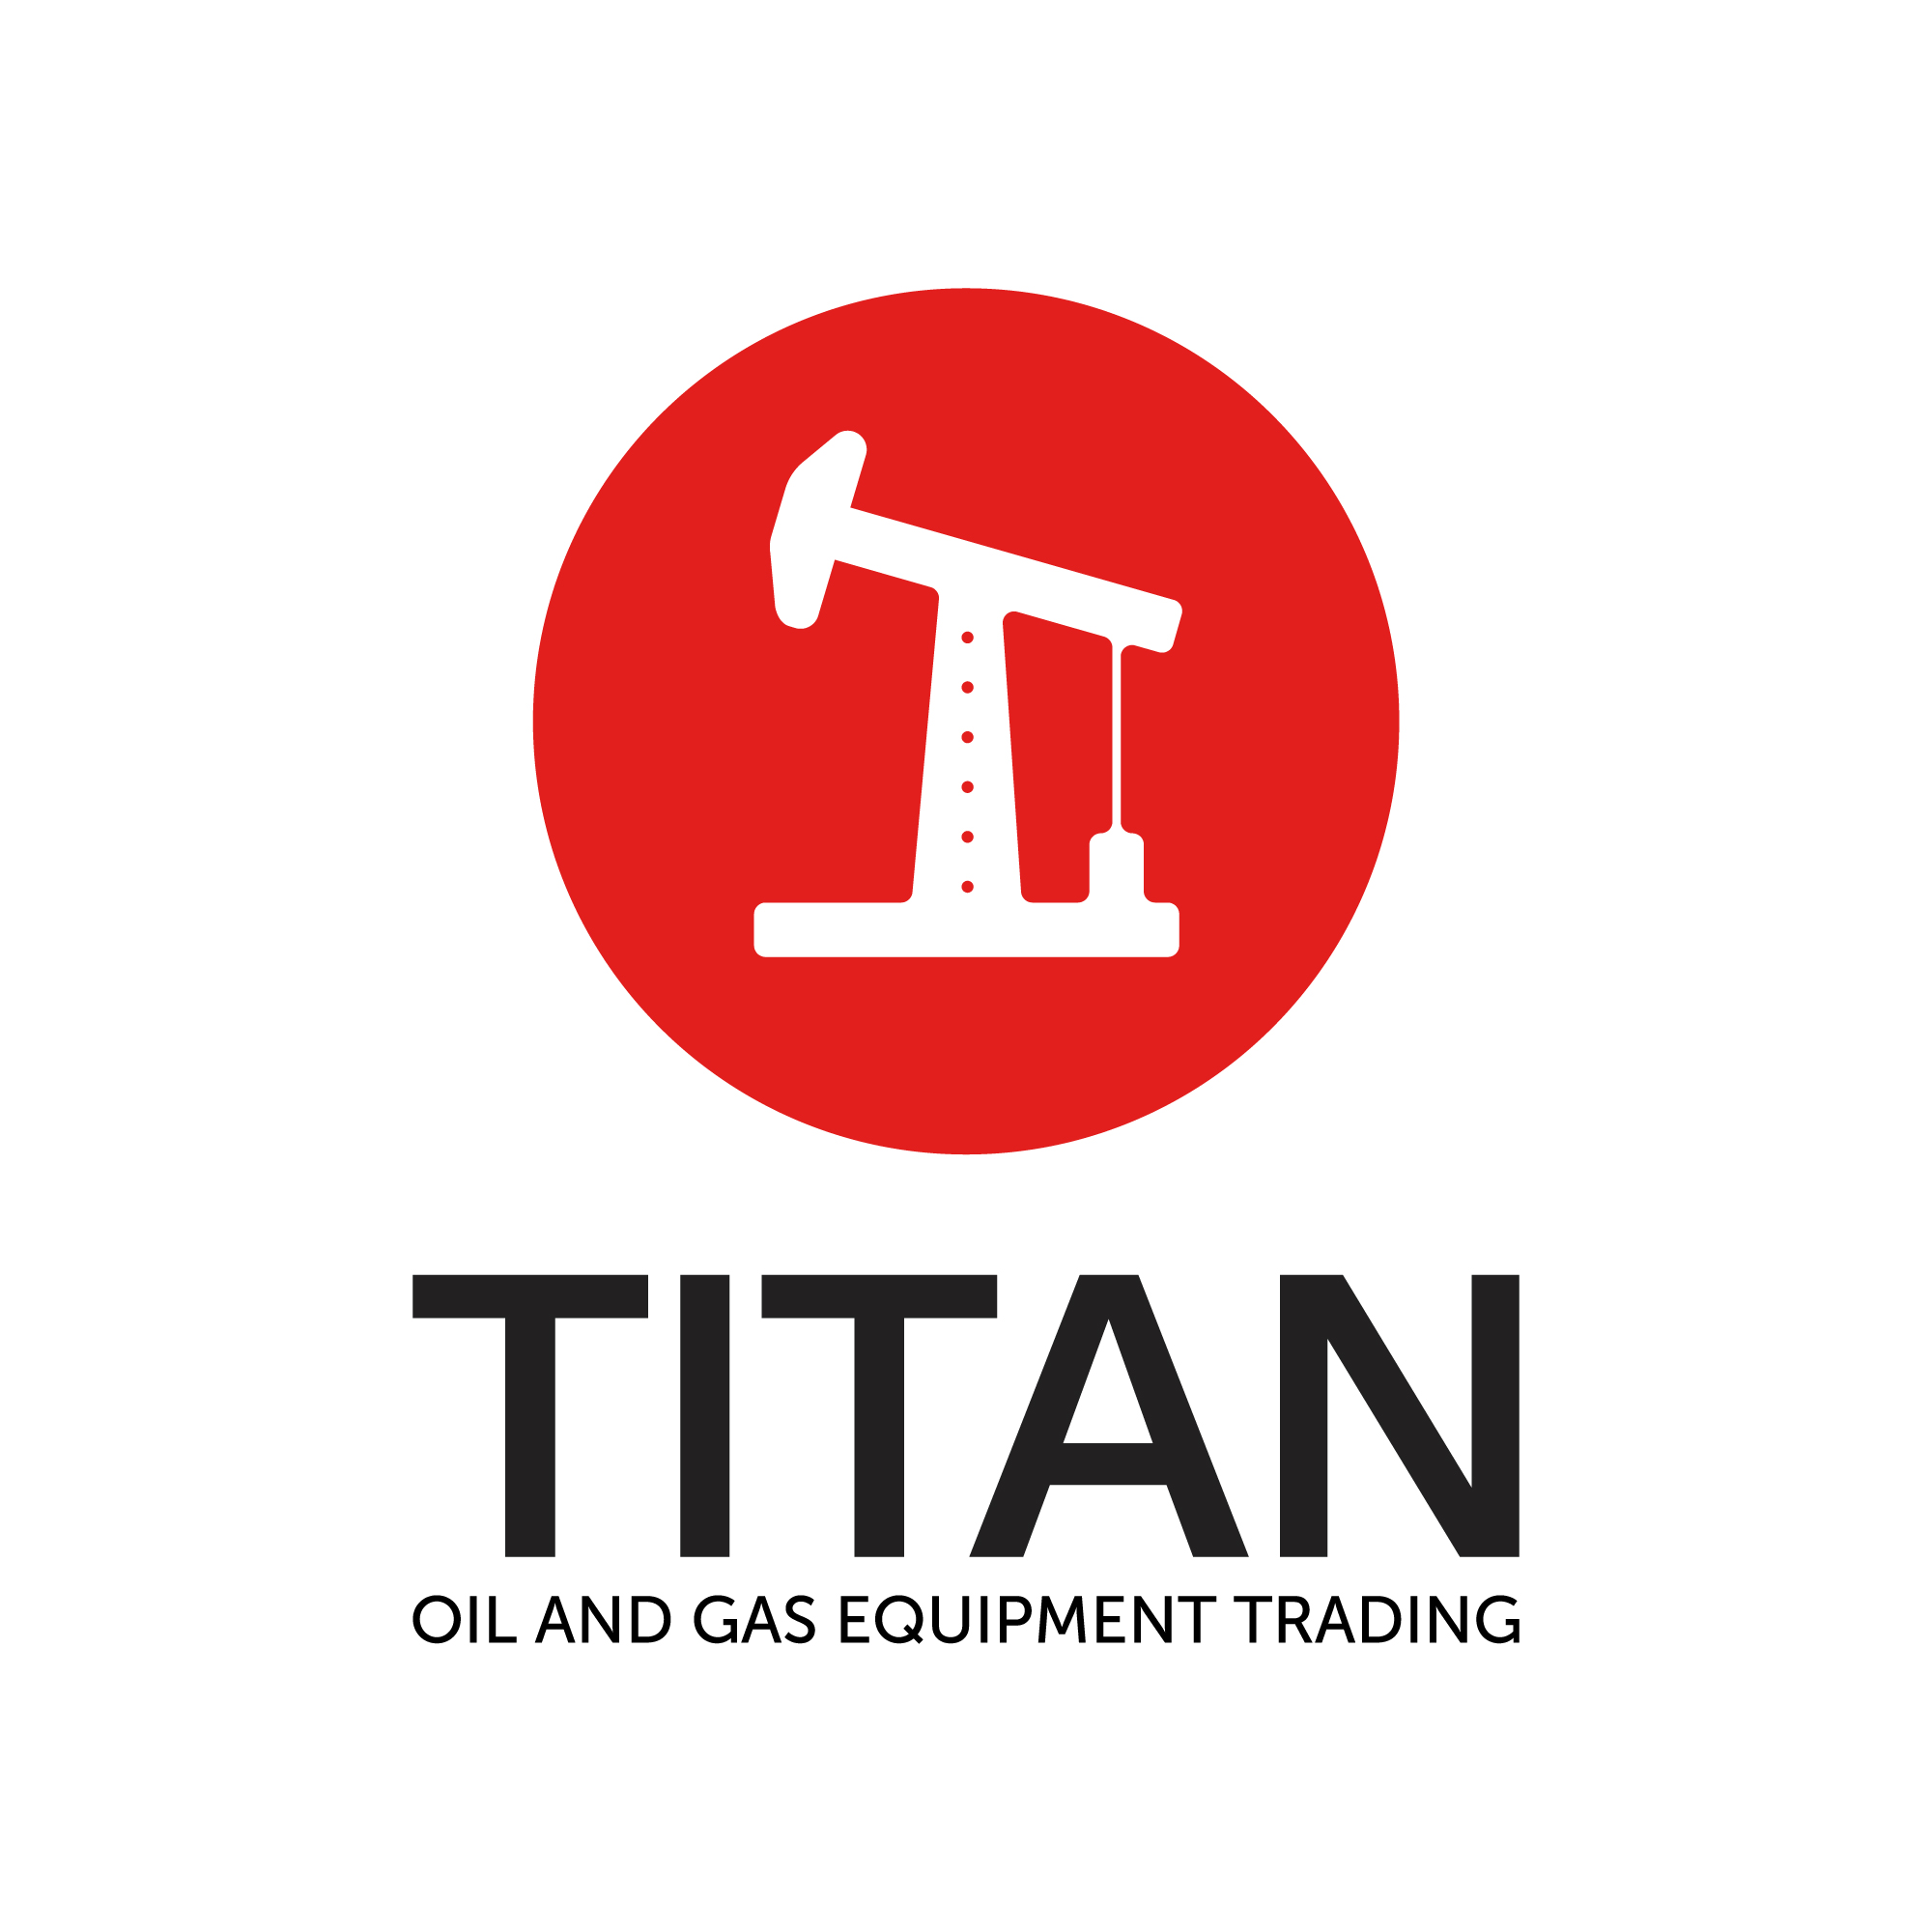 TITAN OIL AND GAS EQUIPMENT TRADING